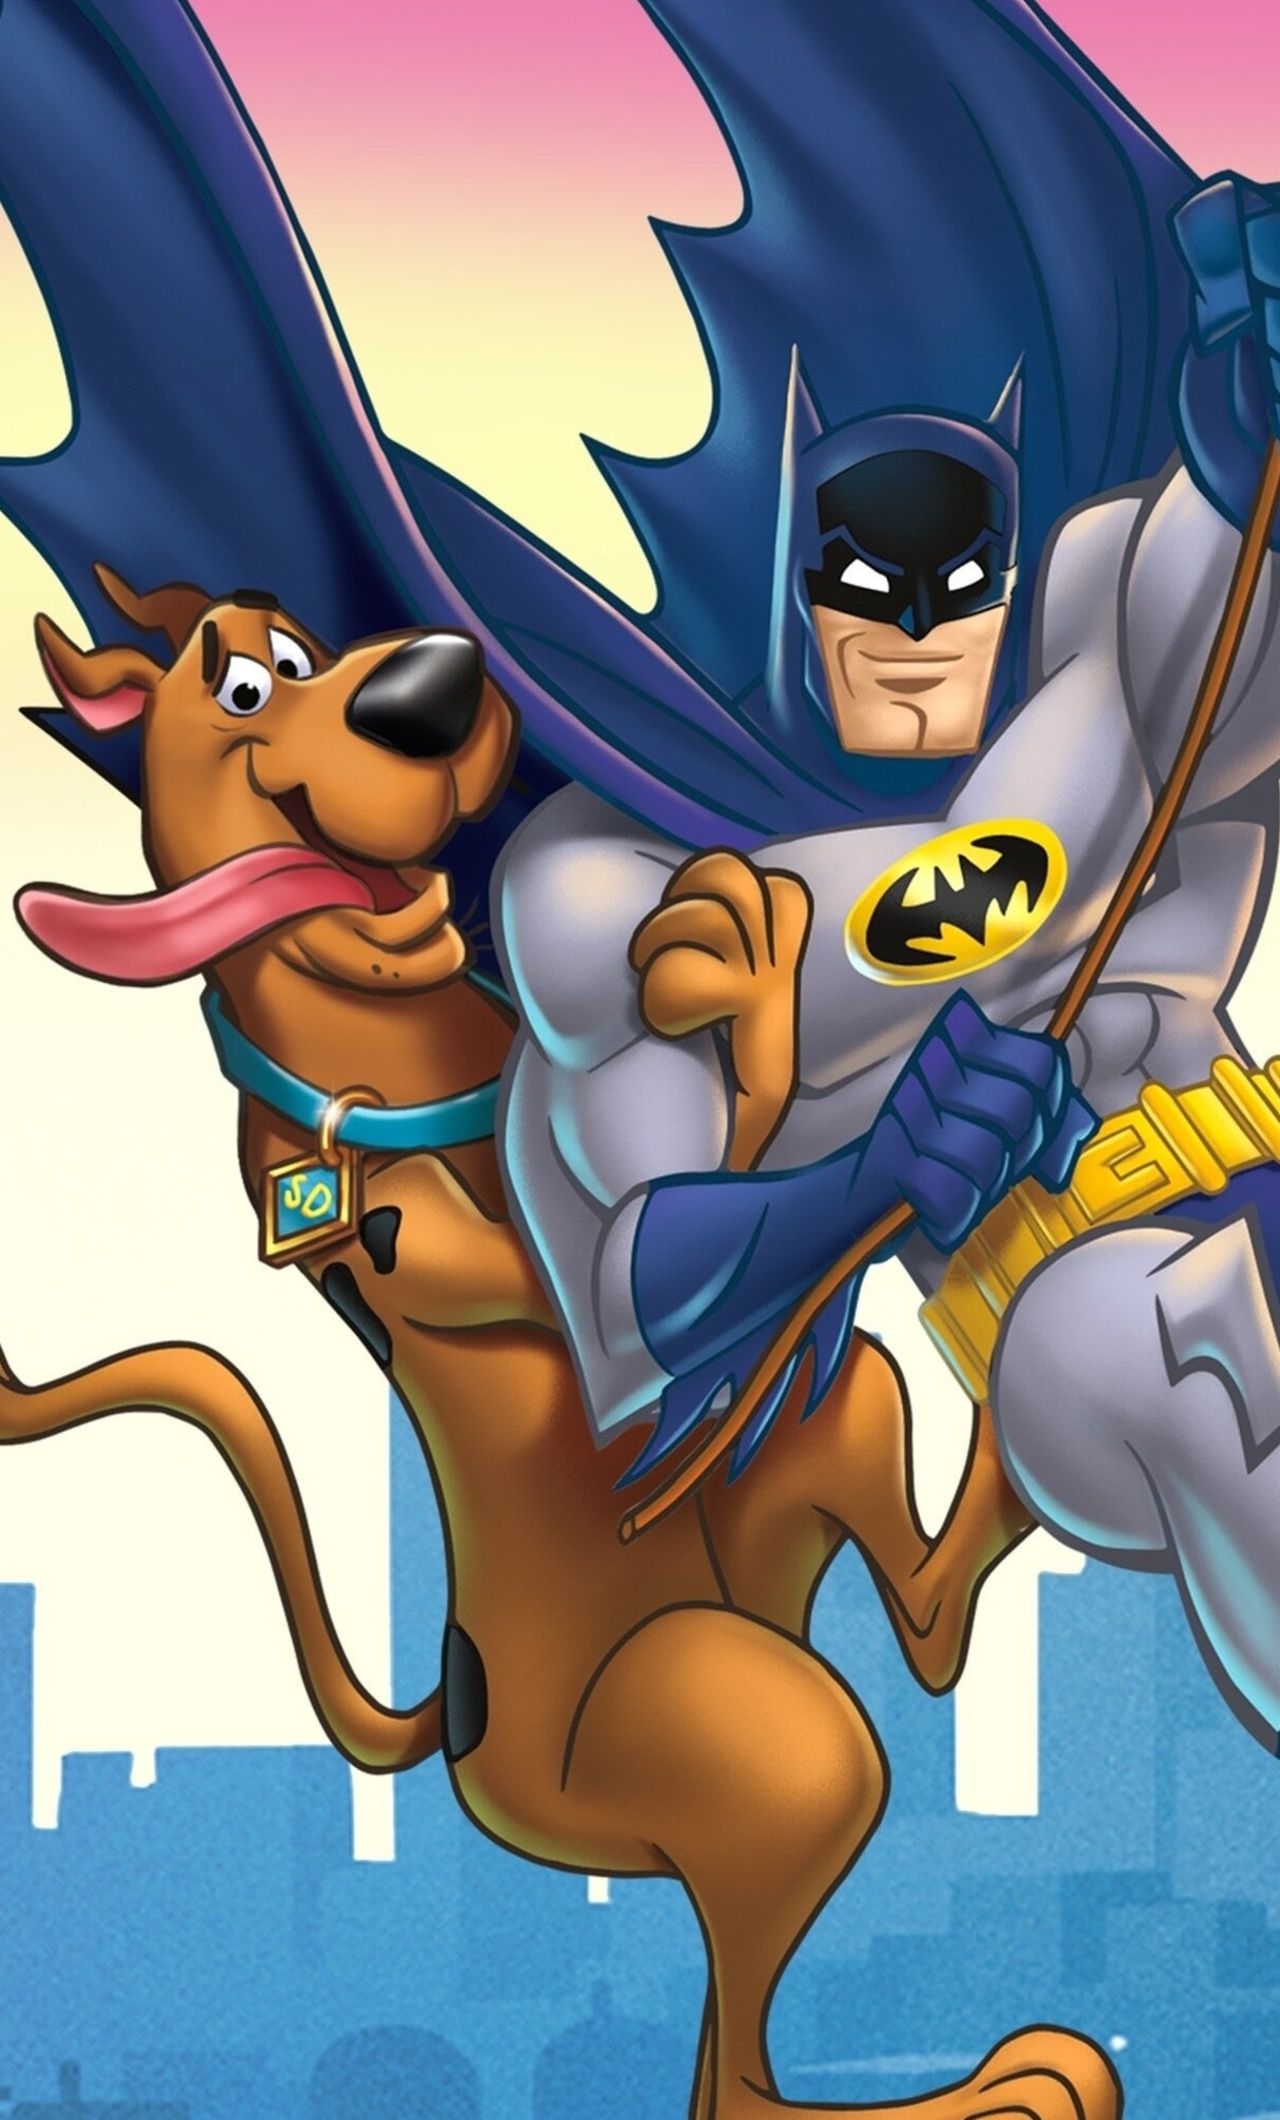 Scooby Doo And Batman The Brave And The Bold iPhone HD 4k Wallpaper, Image, Background, Photo and Picture